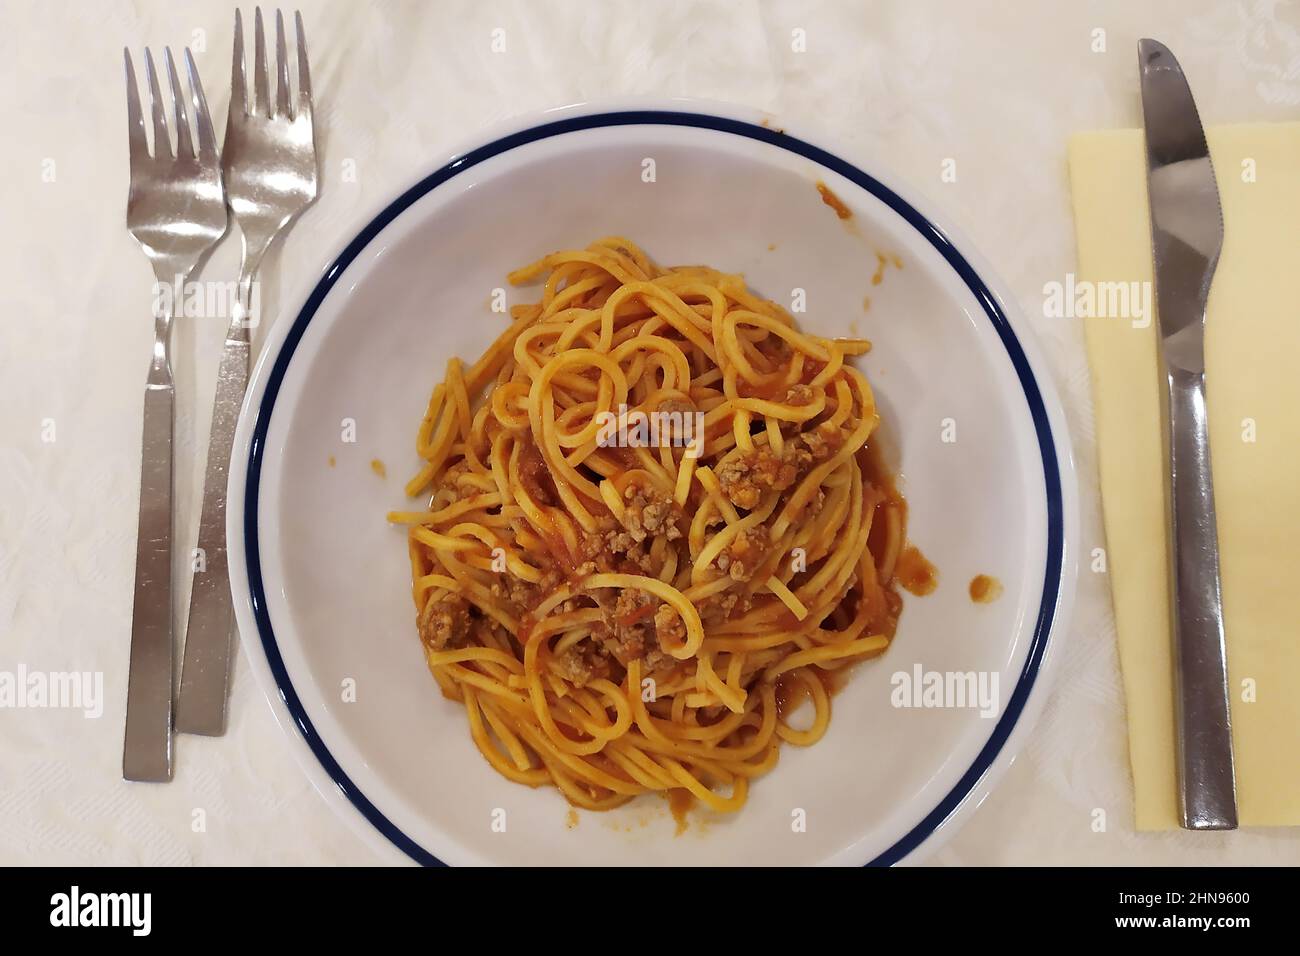 Food, First Course, Linguine with ragu ' Stock Photo